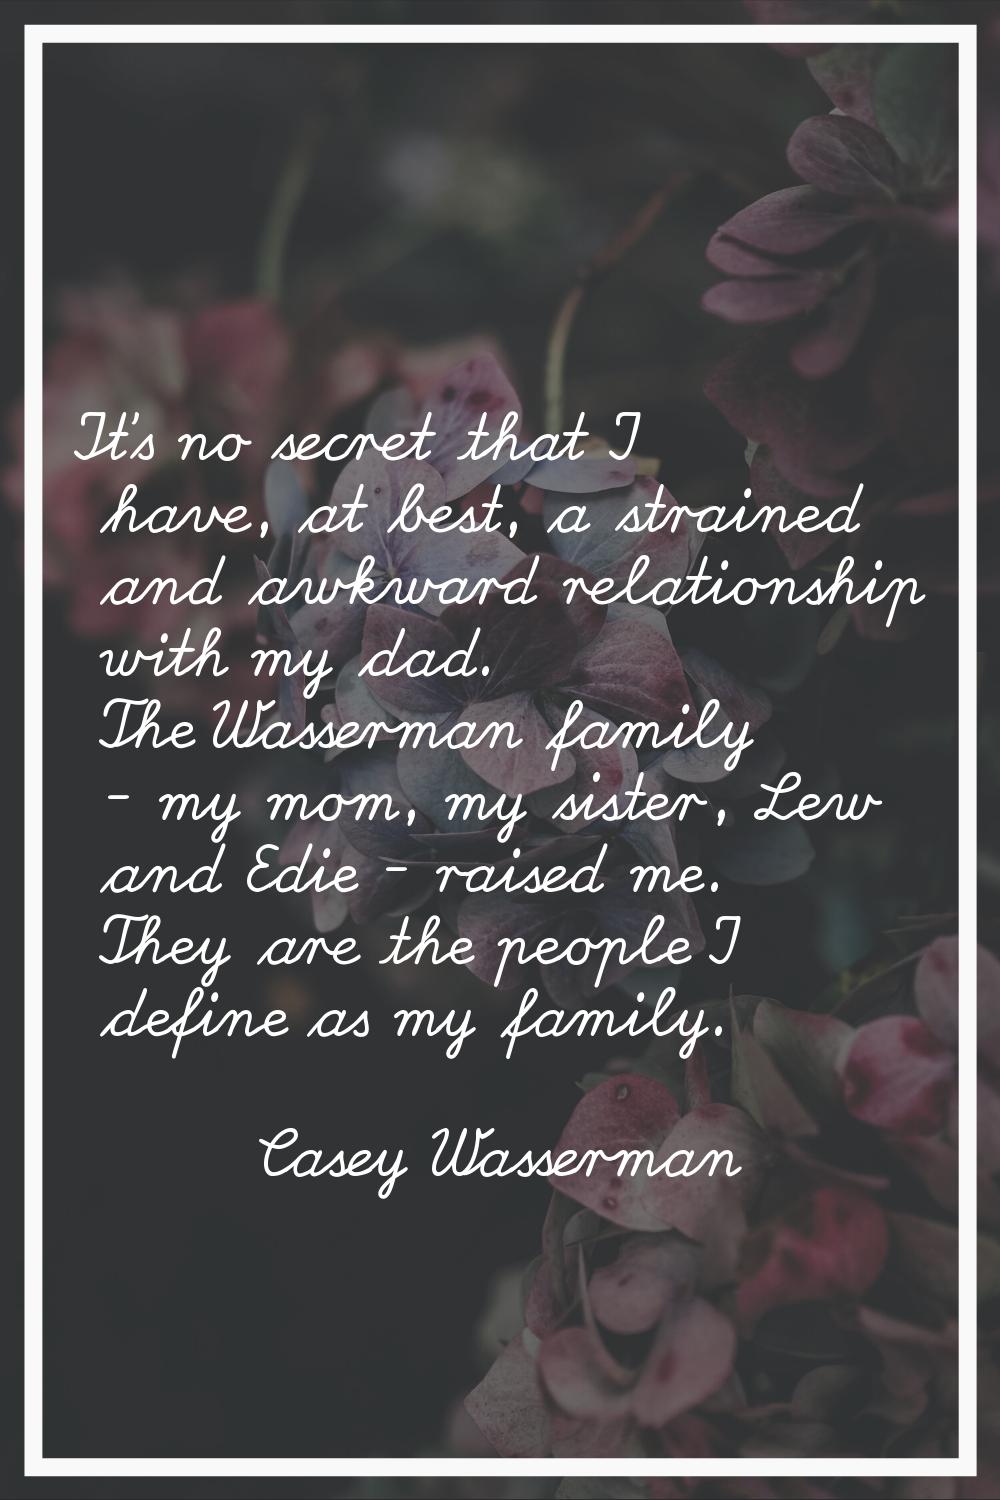 It's no secret that I have, at best, a strained and awkward relationship with my dad. The Wasserman